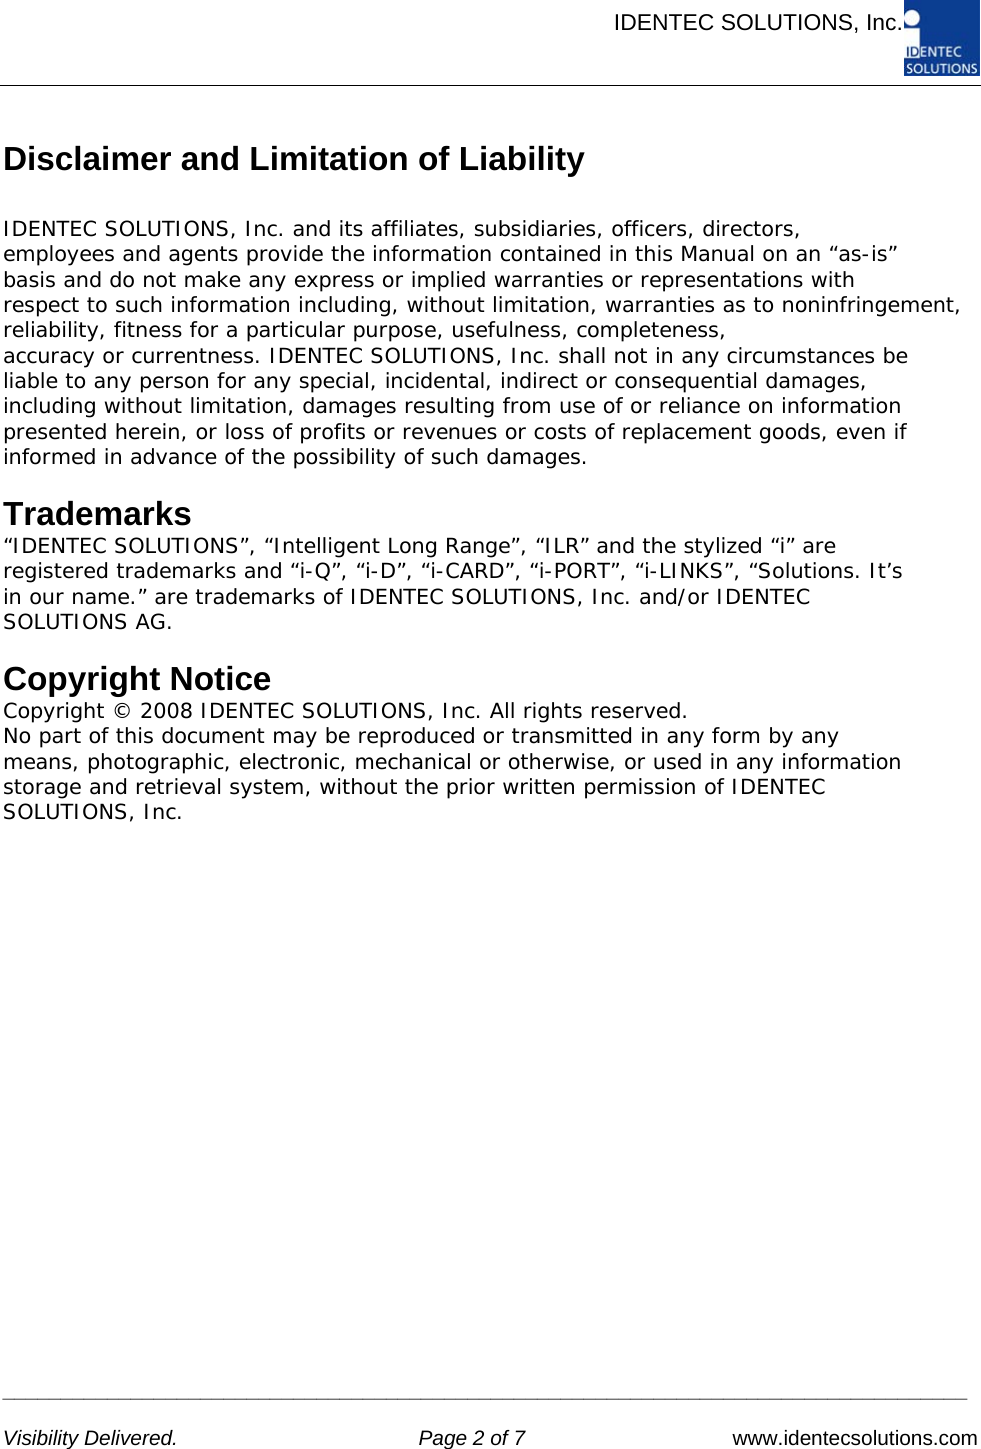      IDENTEC SOLUTIONS, Inc.     ___________________________________________________________________________________   Visibility Delivered.  Page 2 of 7   www.identecsolutions.com Disclaimer and Limitation of Liability  IDENTEC SOLUTIONS, Inc. and its affiliates, subsidiaries, officers, directors, employees and agents provide the information contained in this Manual on an “as-is” basis and do not make any express or implied warranties or representations with respect to such information including, without limitation, warranties as to noninfringement, reliability, fitness for a particular purpose, usefulness, completeness, accuracy or currentness. IDENTEC SOLUTIONS, Inc. shall not in any circumstances be liable to any person for any special, incidental, indirect or consequential damages, including without limitation, damages resulting from use of or reliance on information presented herein, or loss of profits or revenues or costs of replacement goods, even if informed in advance of the possibility of such damages.  Trademarks “IDENTEC SOLUTIONS”, “Intelligent Long Range”, “ILR” and the stylized “i” are registered trademarks and “i-Q”, “i-D”, “i-CARD”, “i-PORT”, “i-LINKS”, “Solutions. It’s in our name.” are trademarks of IDENTEC SOLUTIONS, Inc. and/or IDENTEC SOLUTIONS AG.  Copyright Notice Copyright © 2008 IDENTEC SOLUTIONS, Inc. All rights reserved. No part of this document may be reproduced or transmitted in any form by any means, photographic, electronic, mechanical or otherwise, or used in any information storage and retrieval system, without the prior written permission of IDENTEC SOLUTIONS, Inc. 